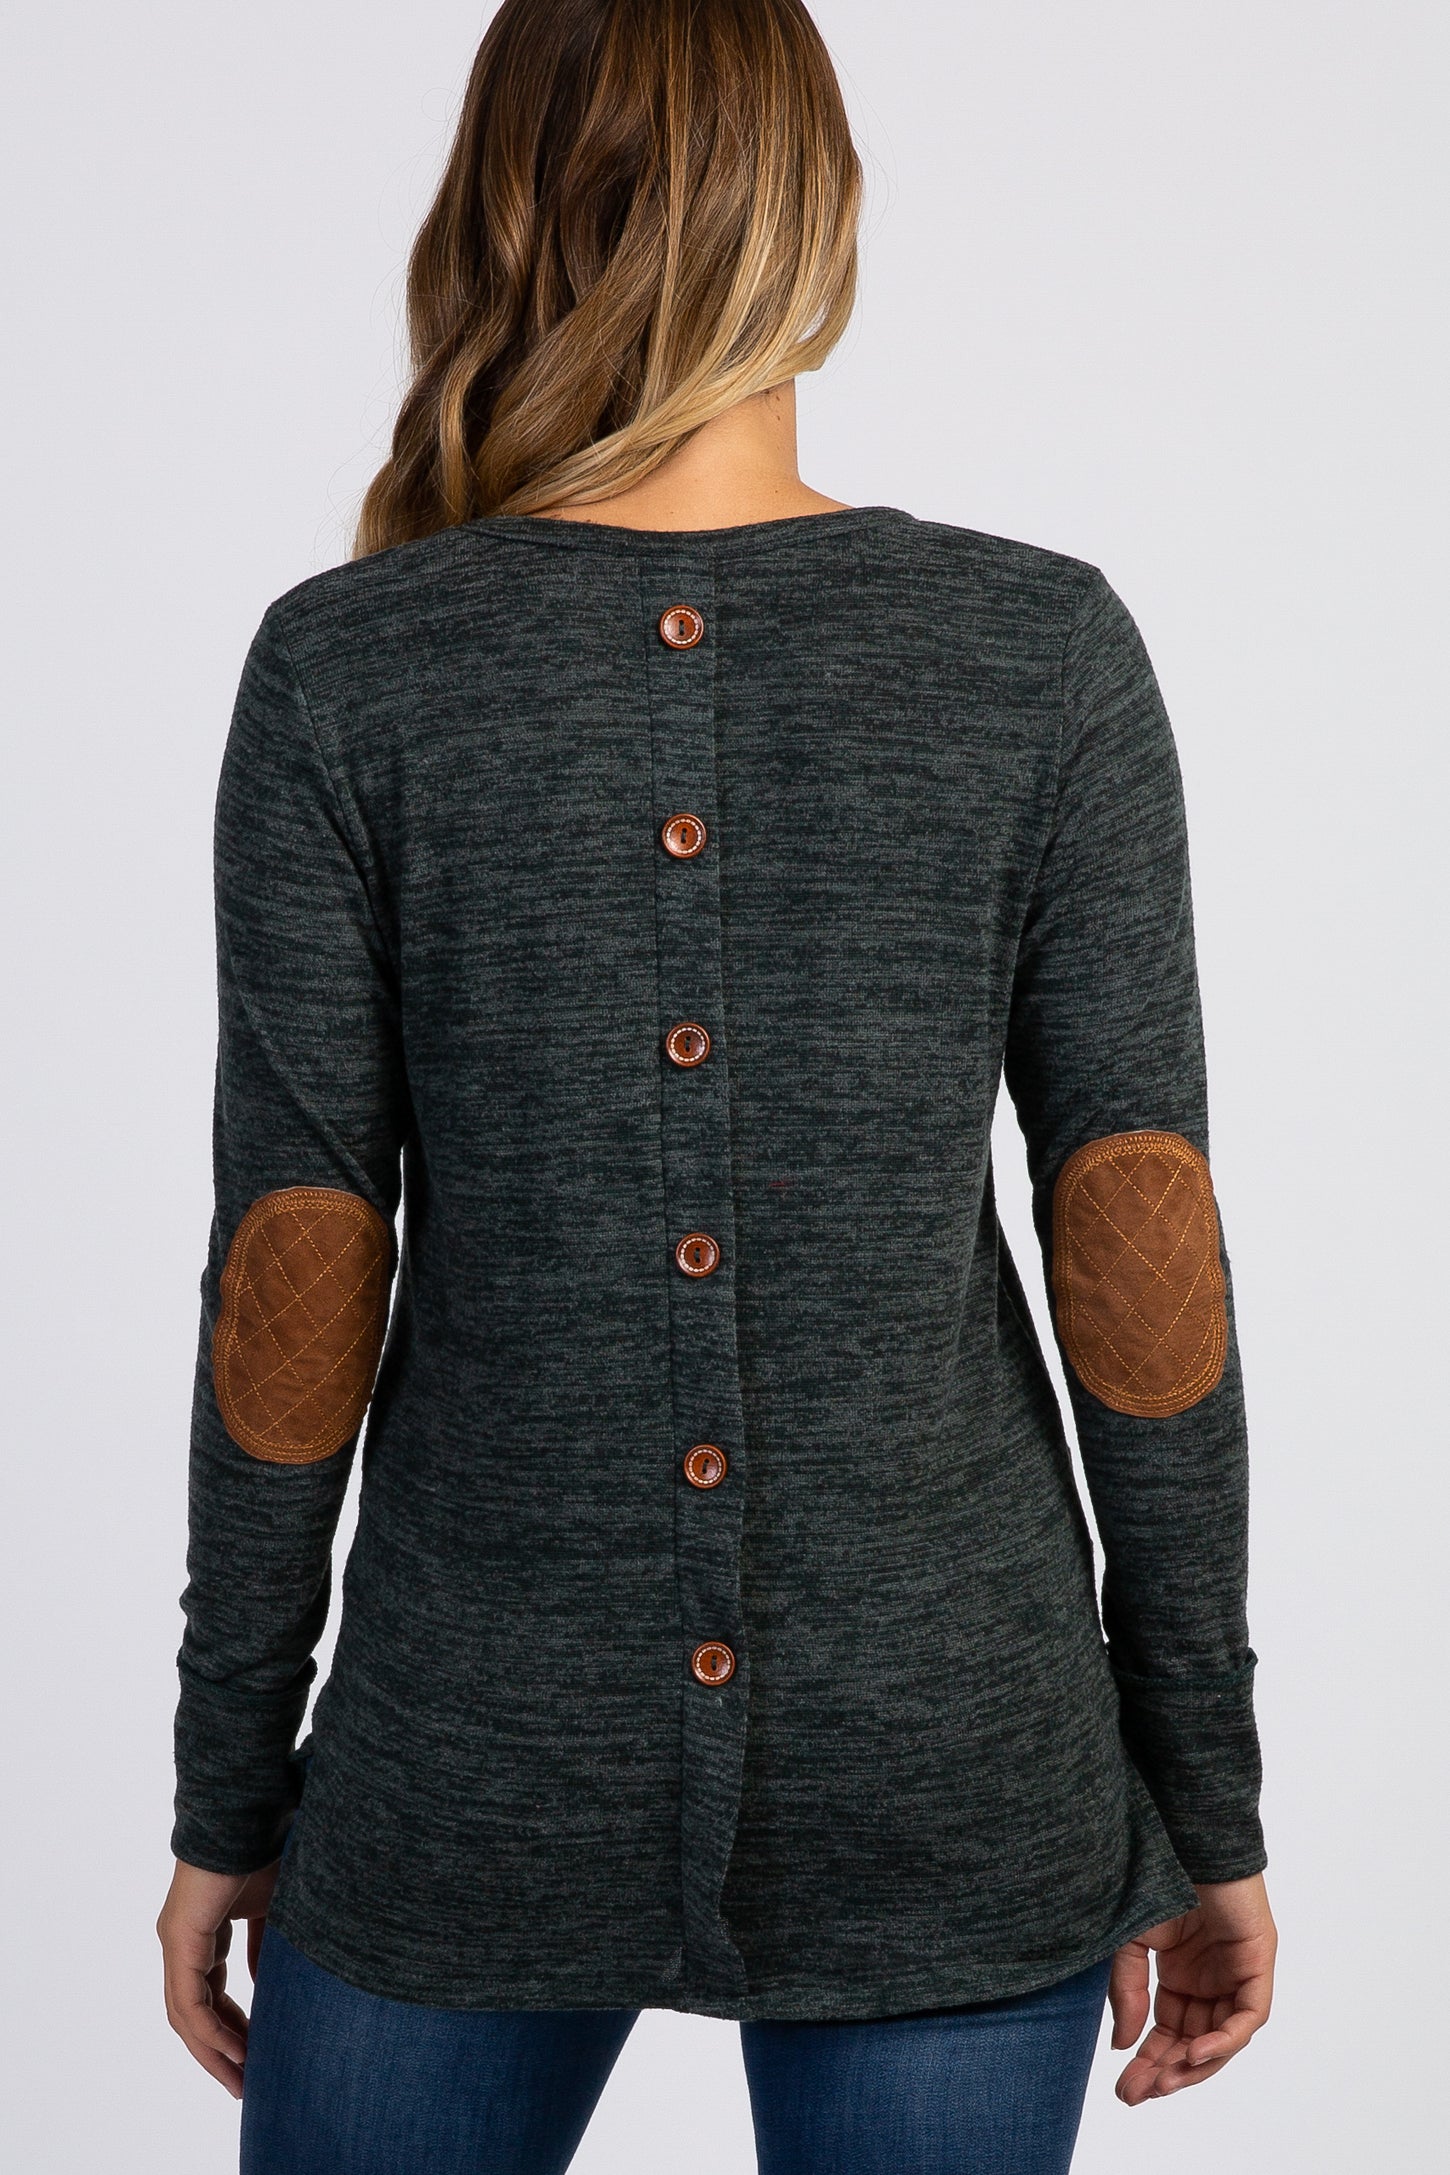 Olive Button Back Quilted Elbow Knit Maternity Top